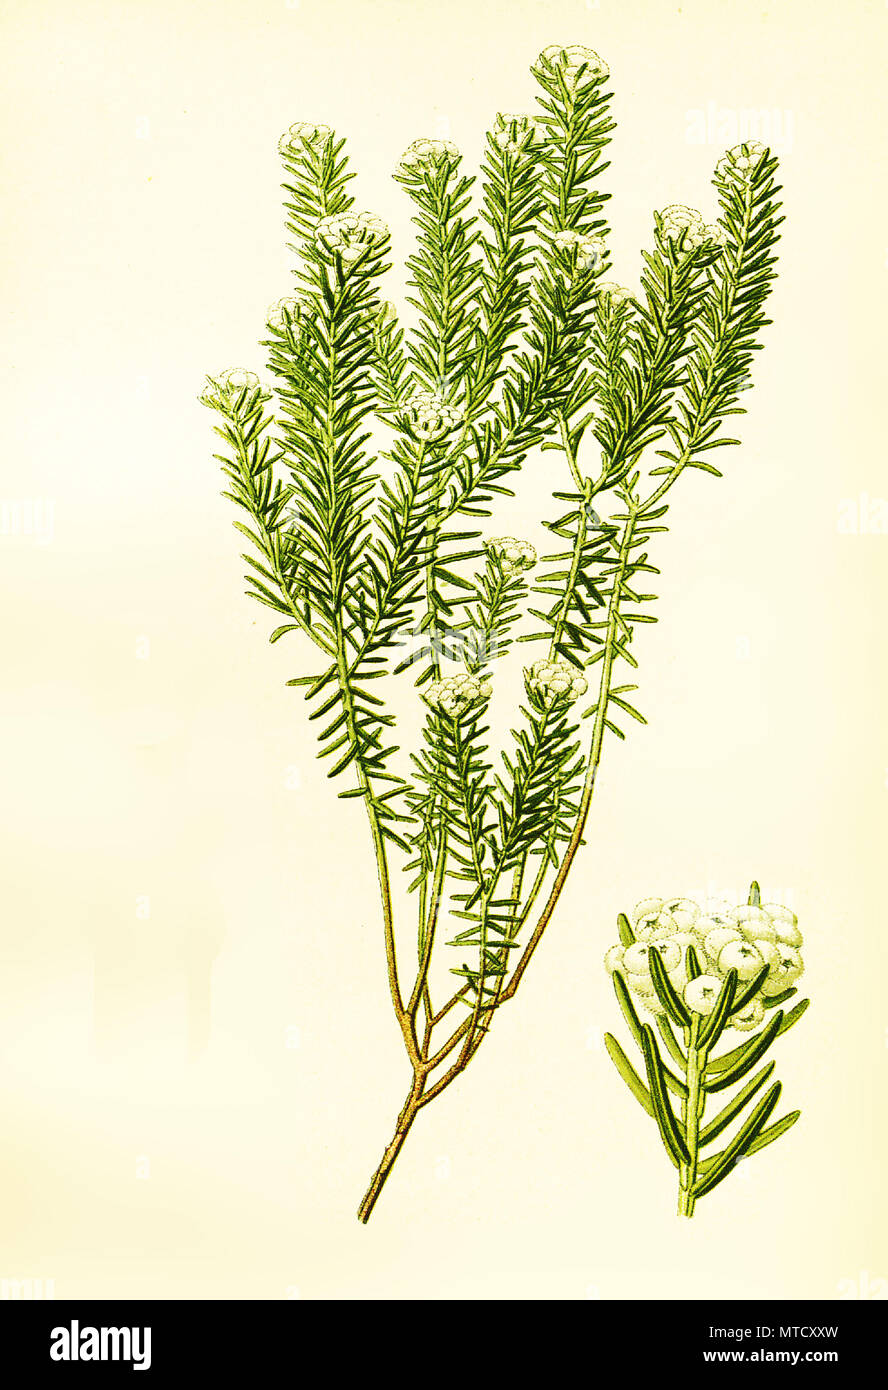 Phylica ericoides, Phylica is a genus of plants in the family Rhamnaceae. Phylica ist eine Gattung aus der Familie der KreuzdorngewÃ¤chse, digital improved reproduction from a print of the 19th century Stock Photo